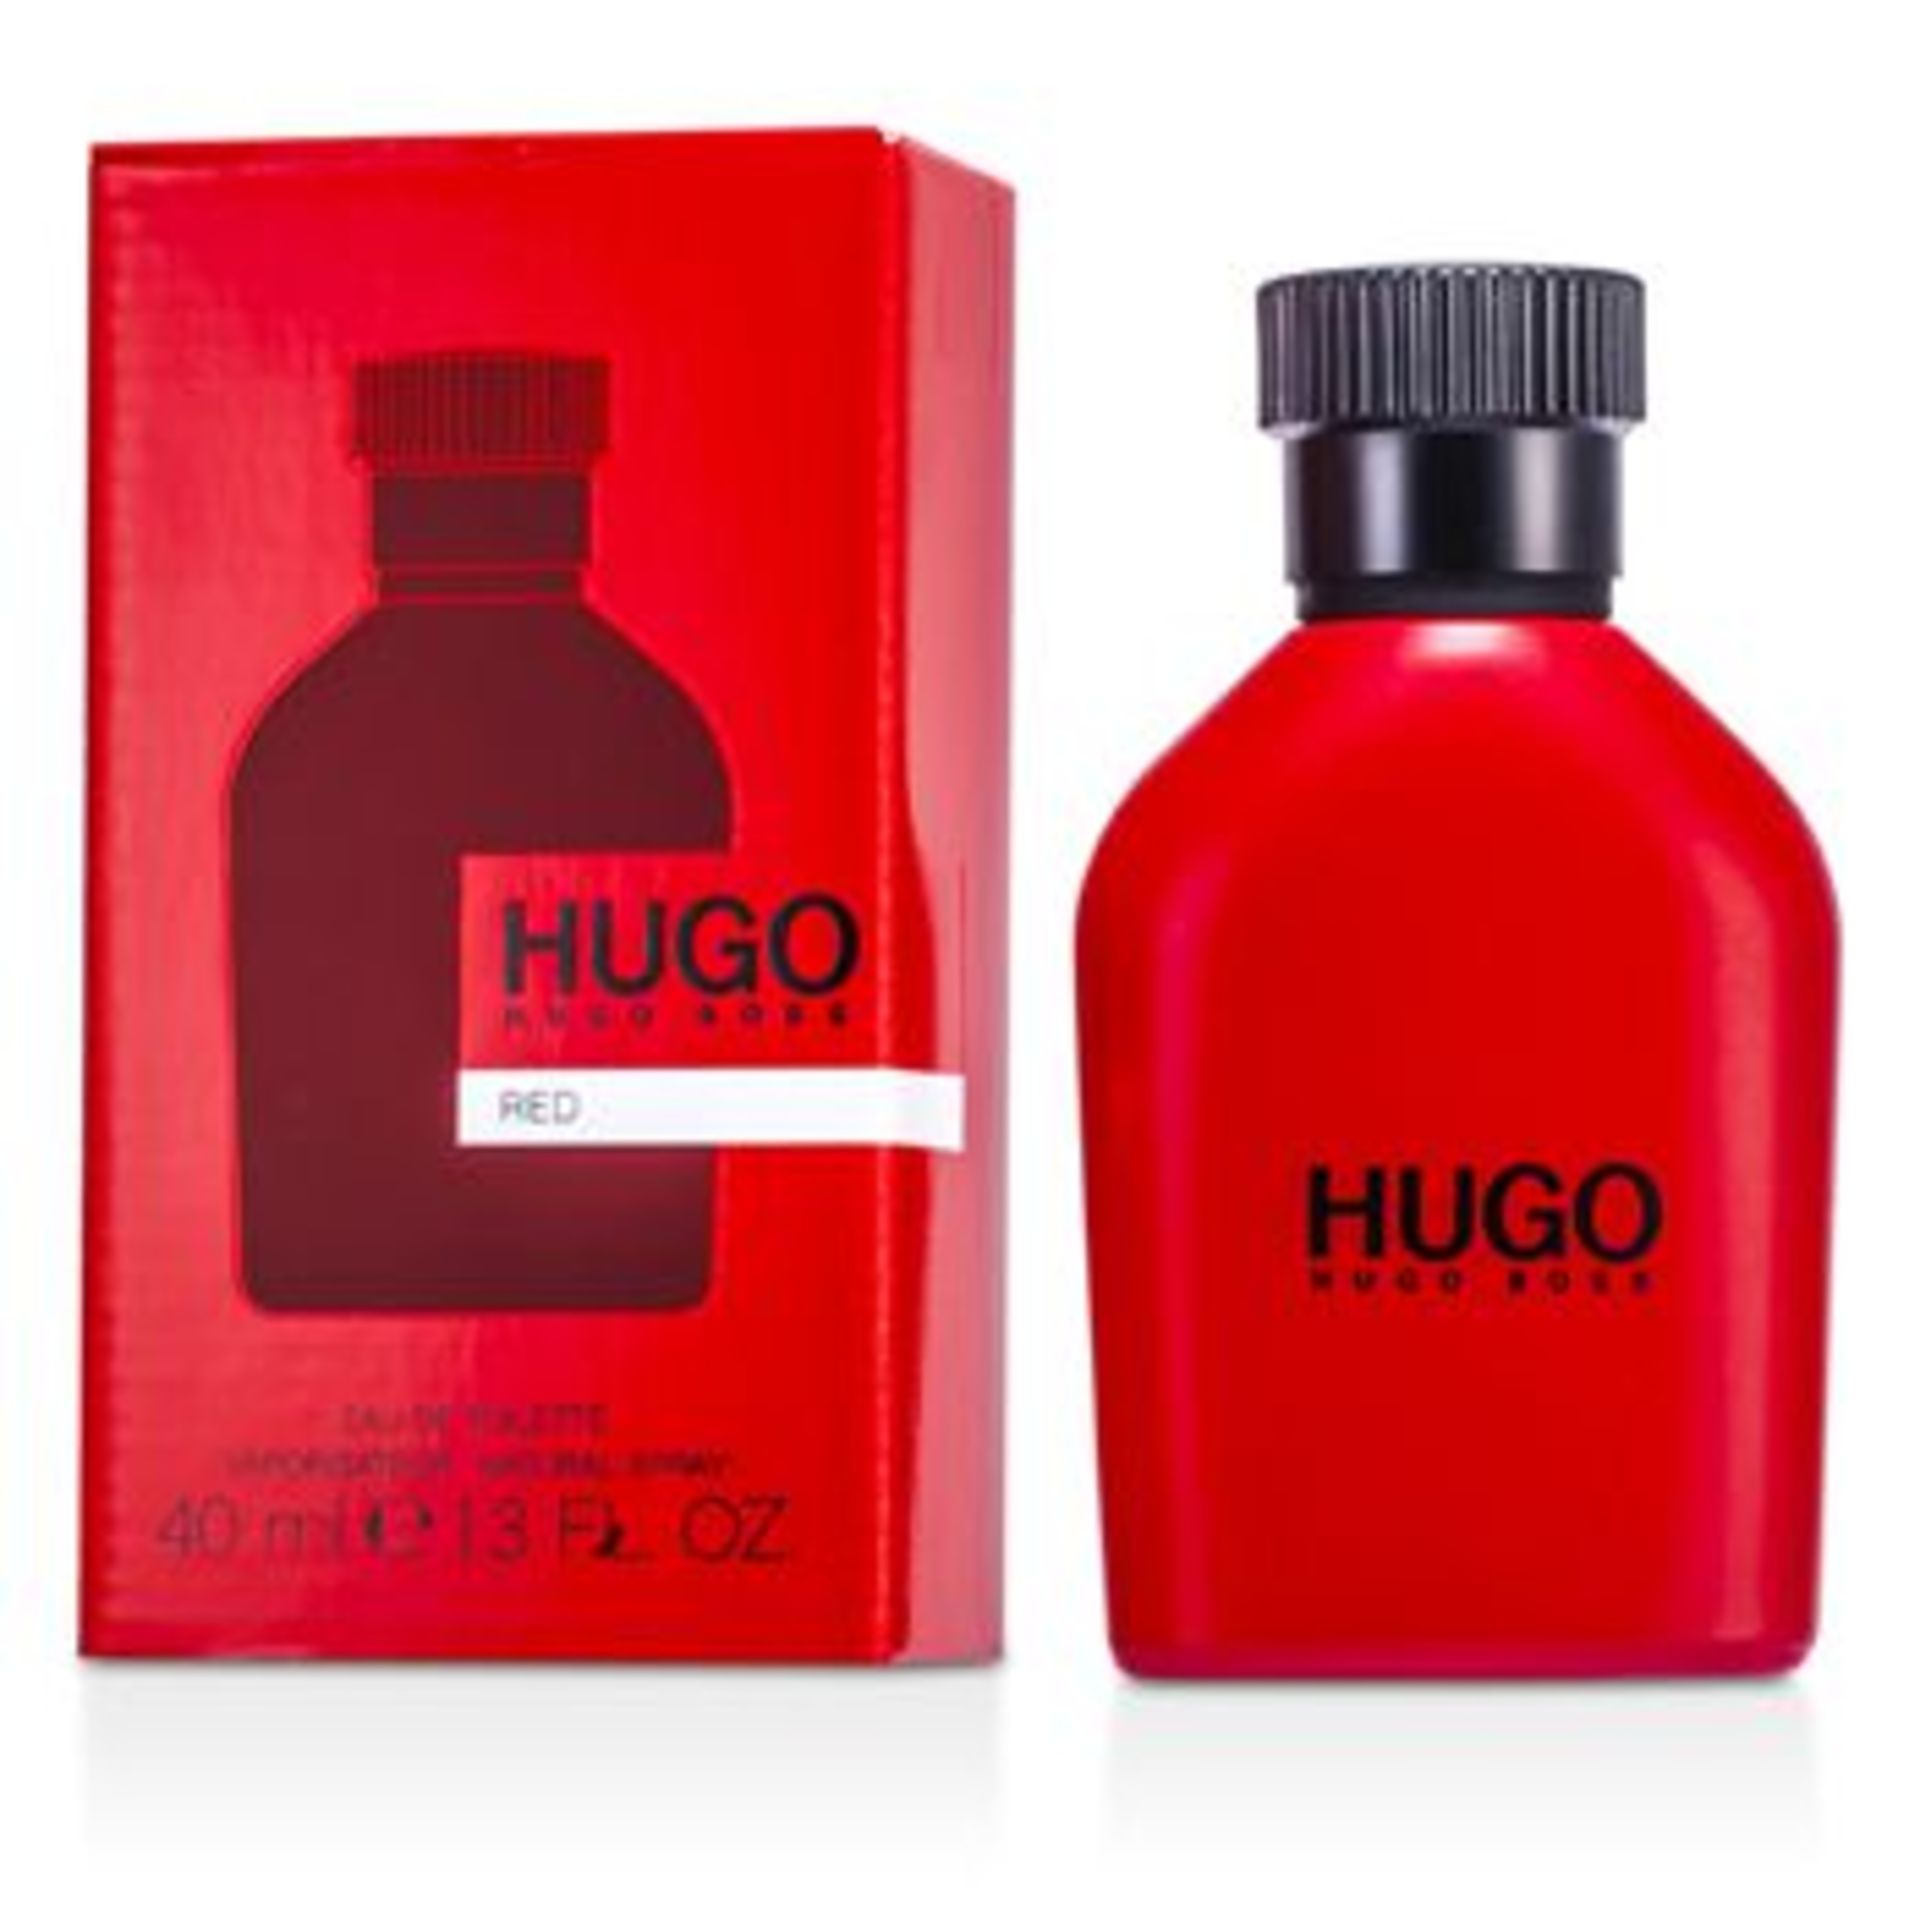 V Brand New Hugo Boss Red EDT Spray 40ml Superdrug £34.00 X 2 YOUR BID PRICE TO BE MULTIPLIED BY - Image 2 of 2